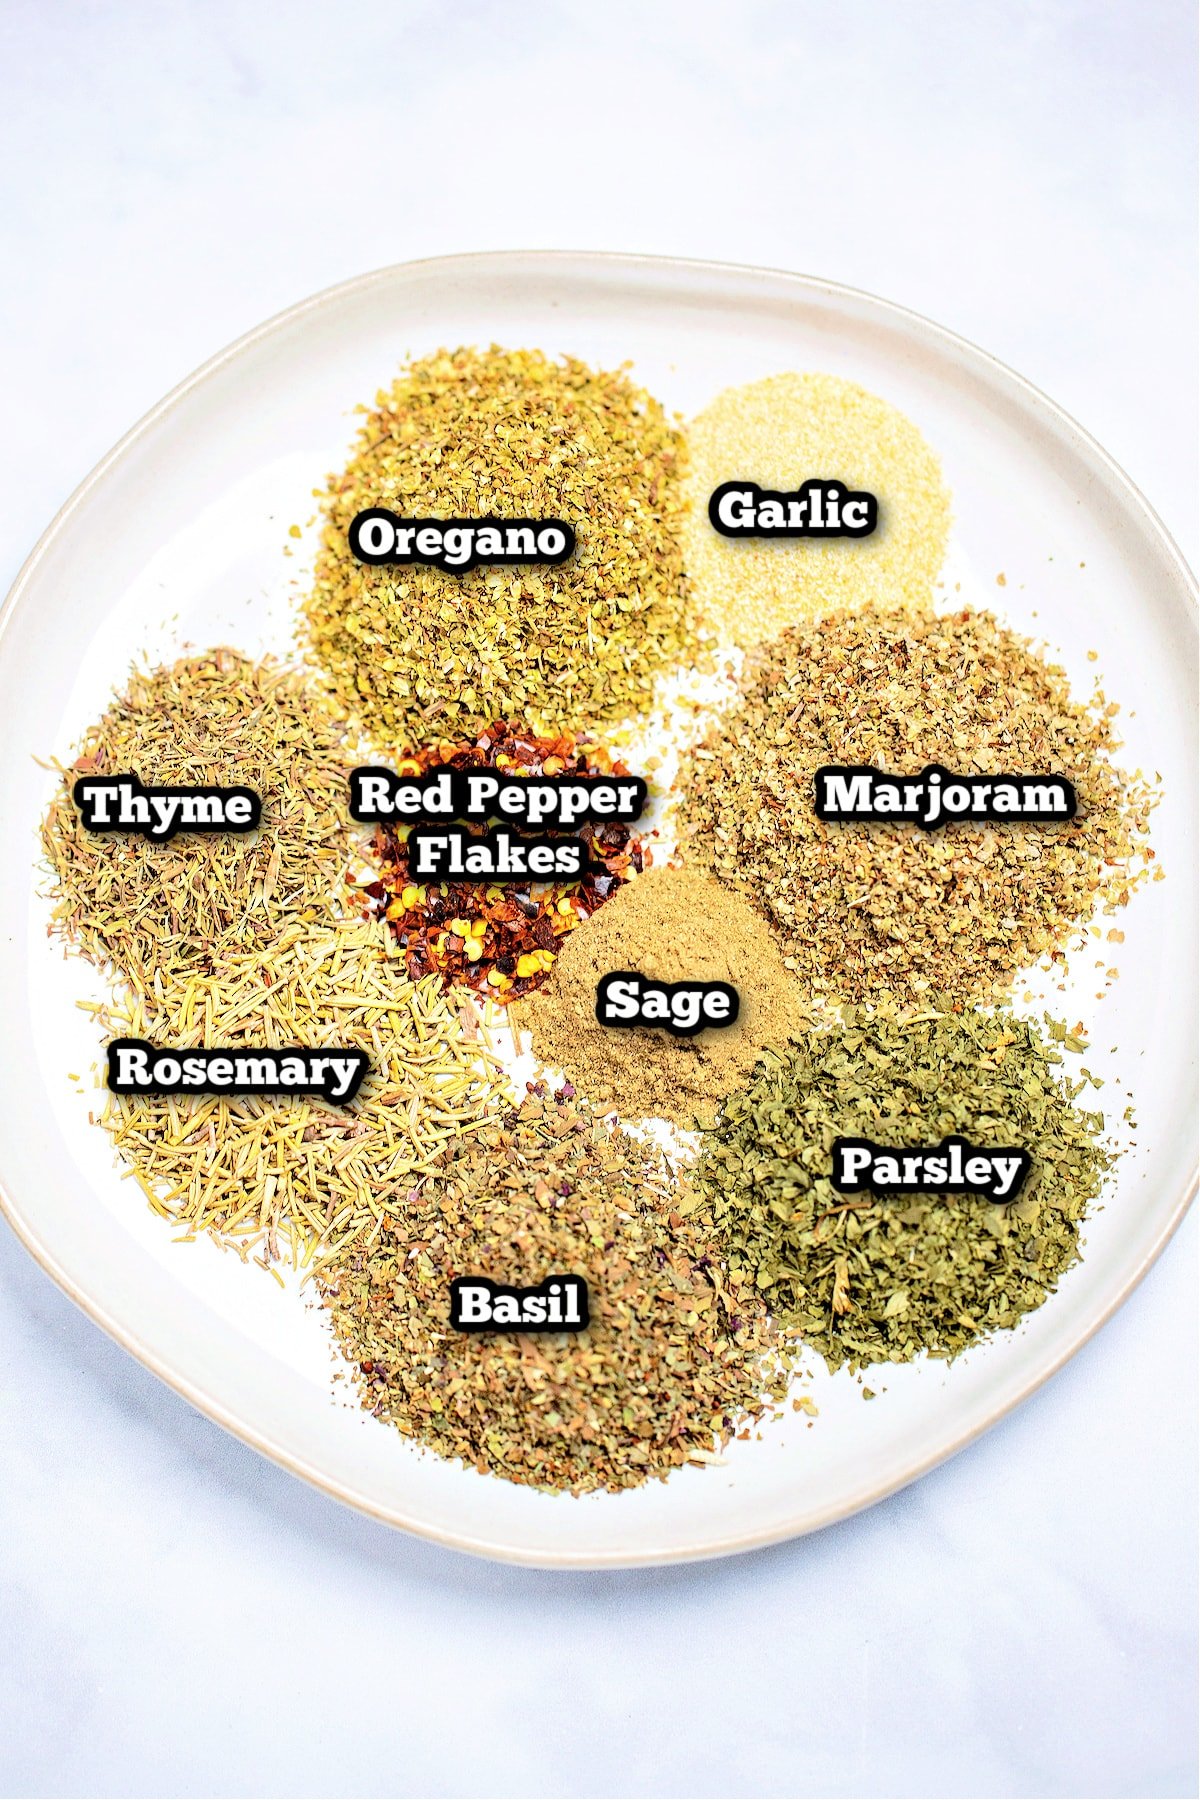 Individual ingredients for homemade Italian seasoning on a plate on a table.